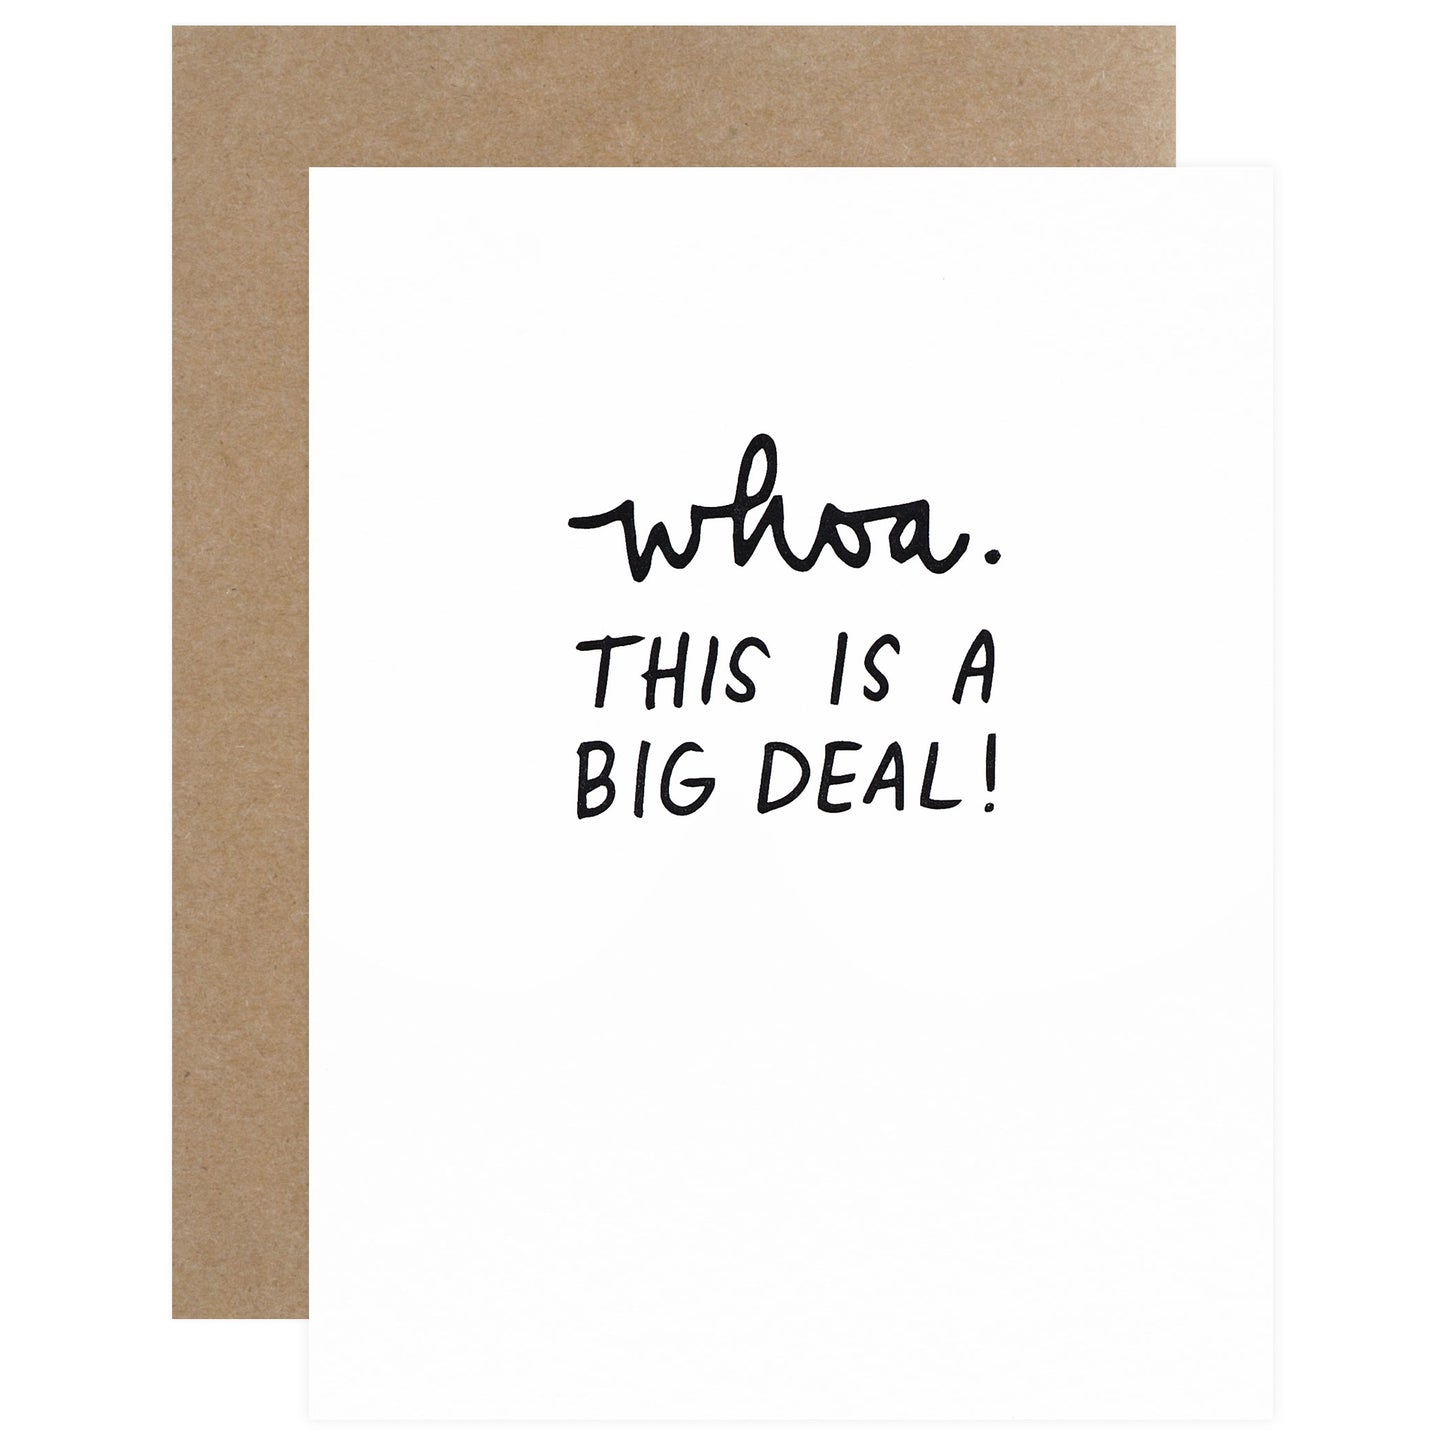 Iron Curtain Press Whoa. This Is A Big Deal! Greeting Card 